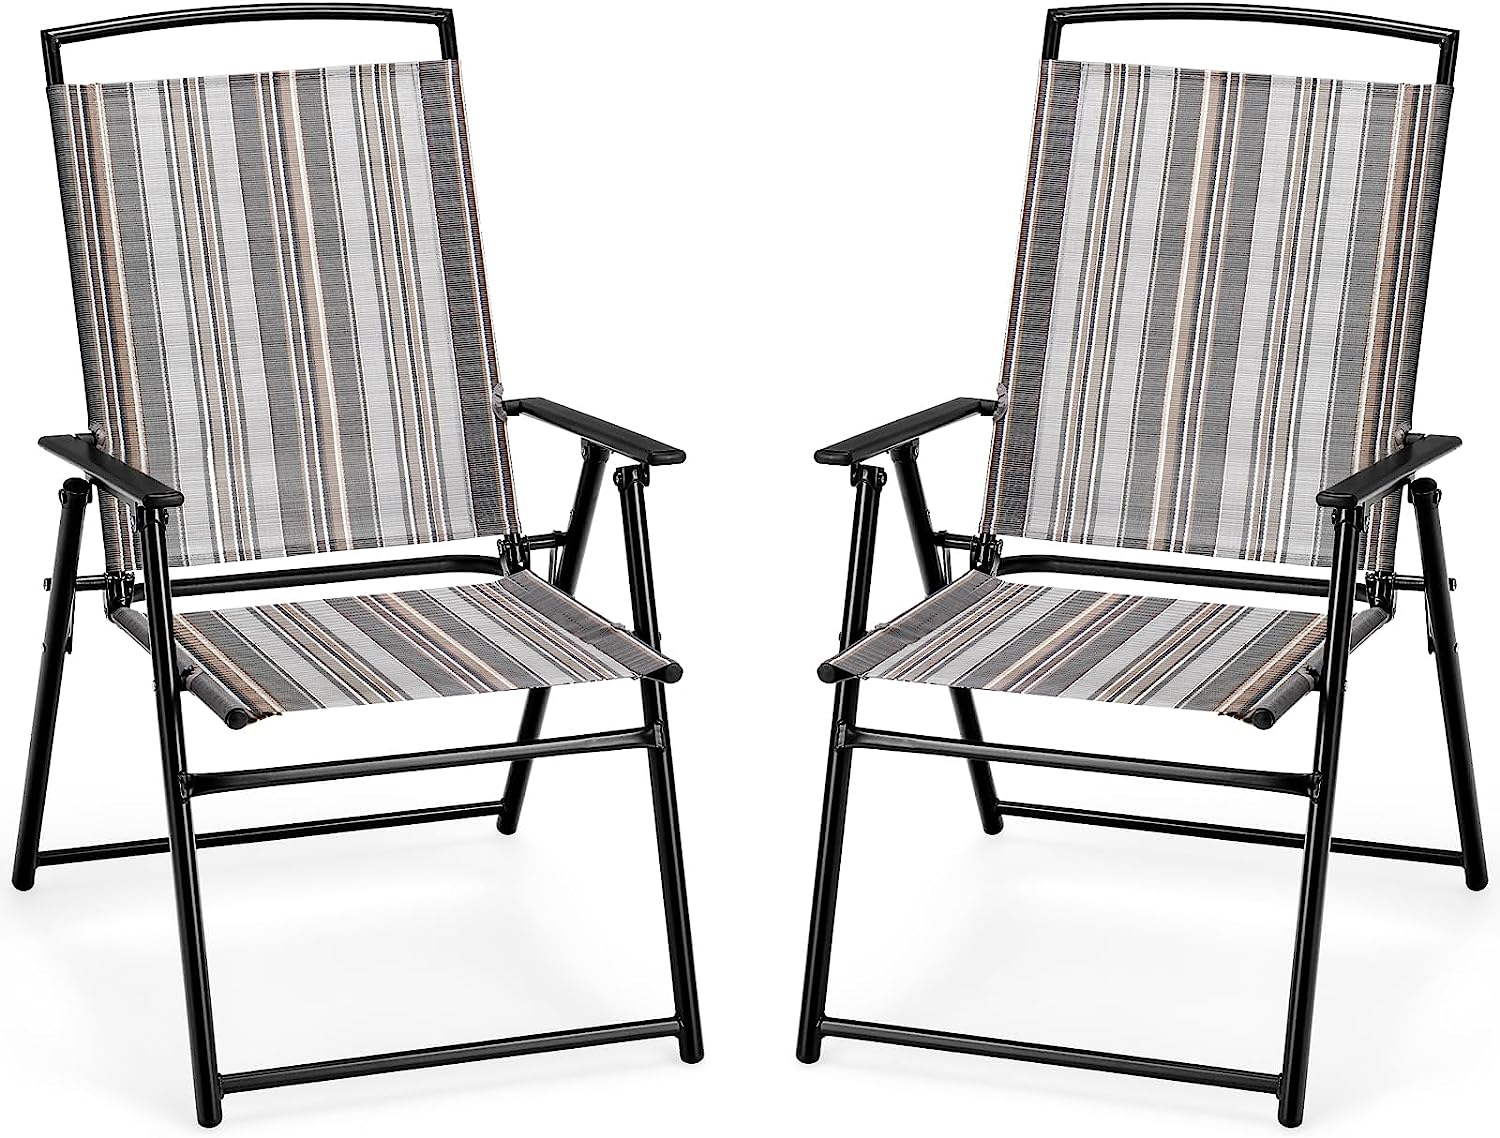 Giantex Patio Chairs Set of 2/4, Outdoor Folding Chairs with Armrests, Metal Frame